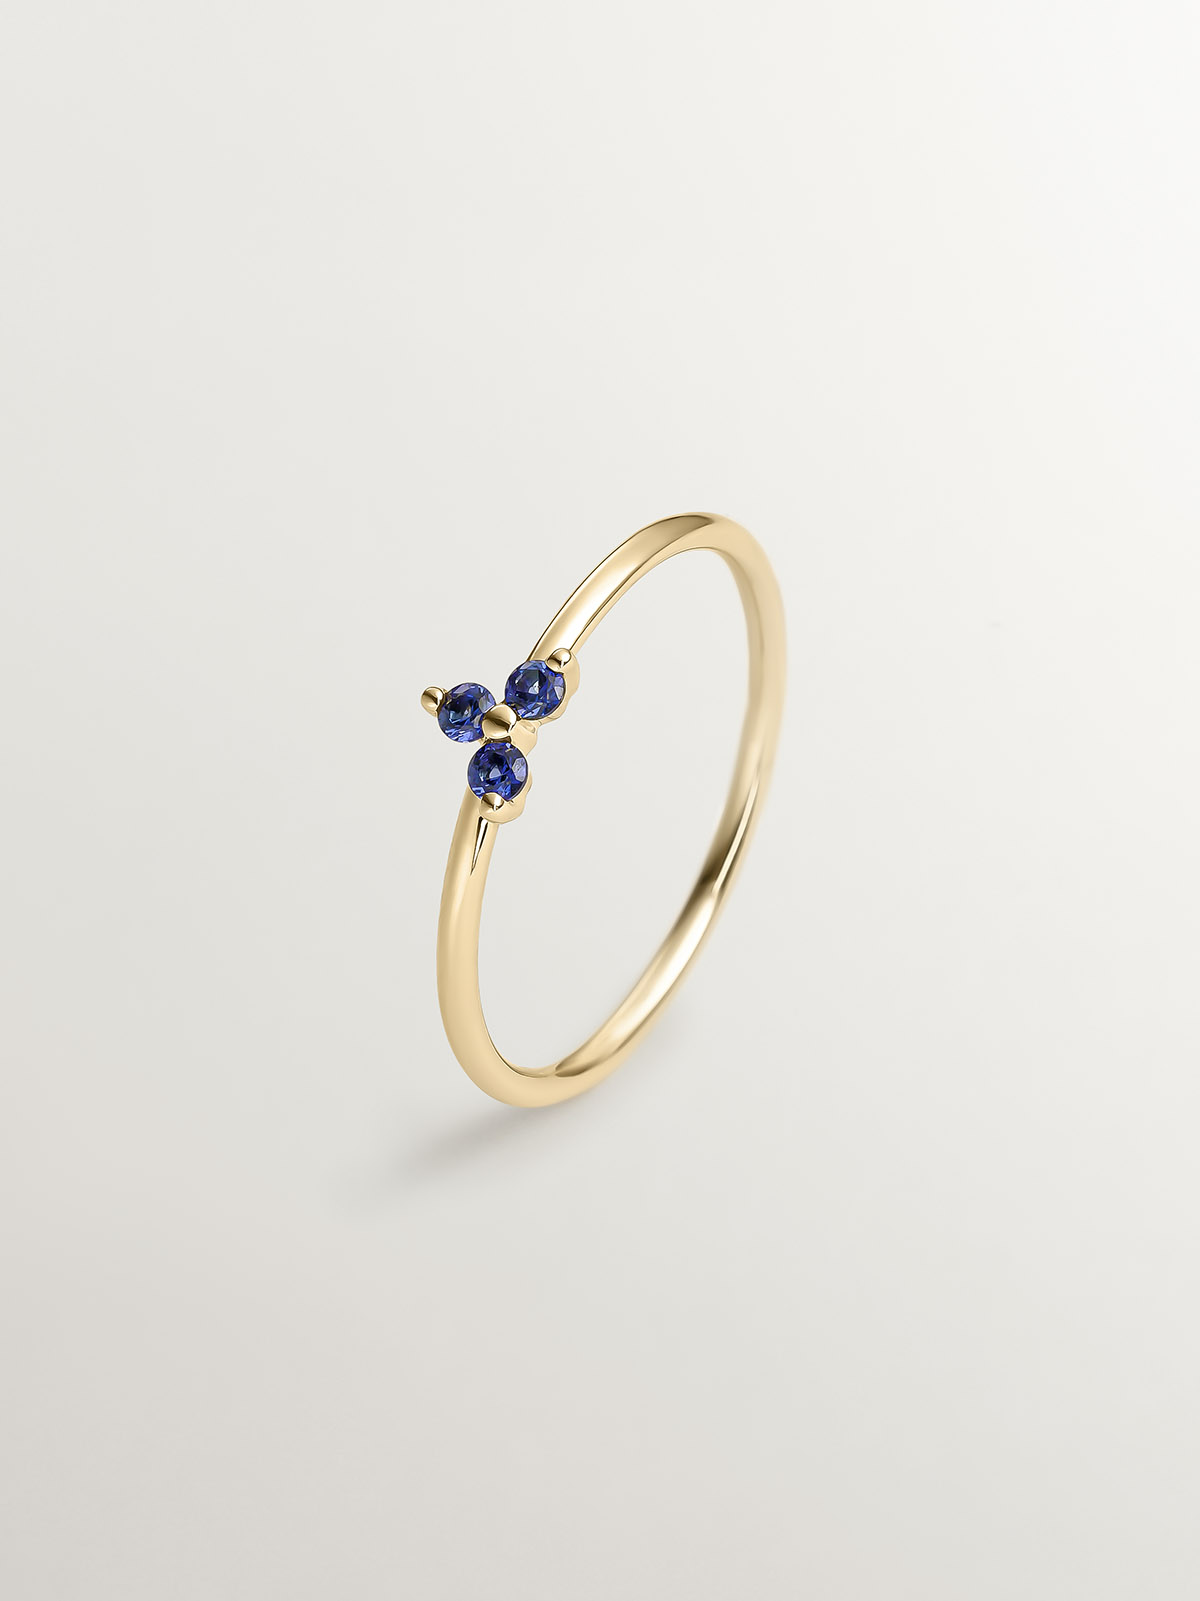 9K Yellow Gold Ring with Blue Sapphires